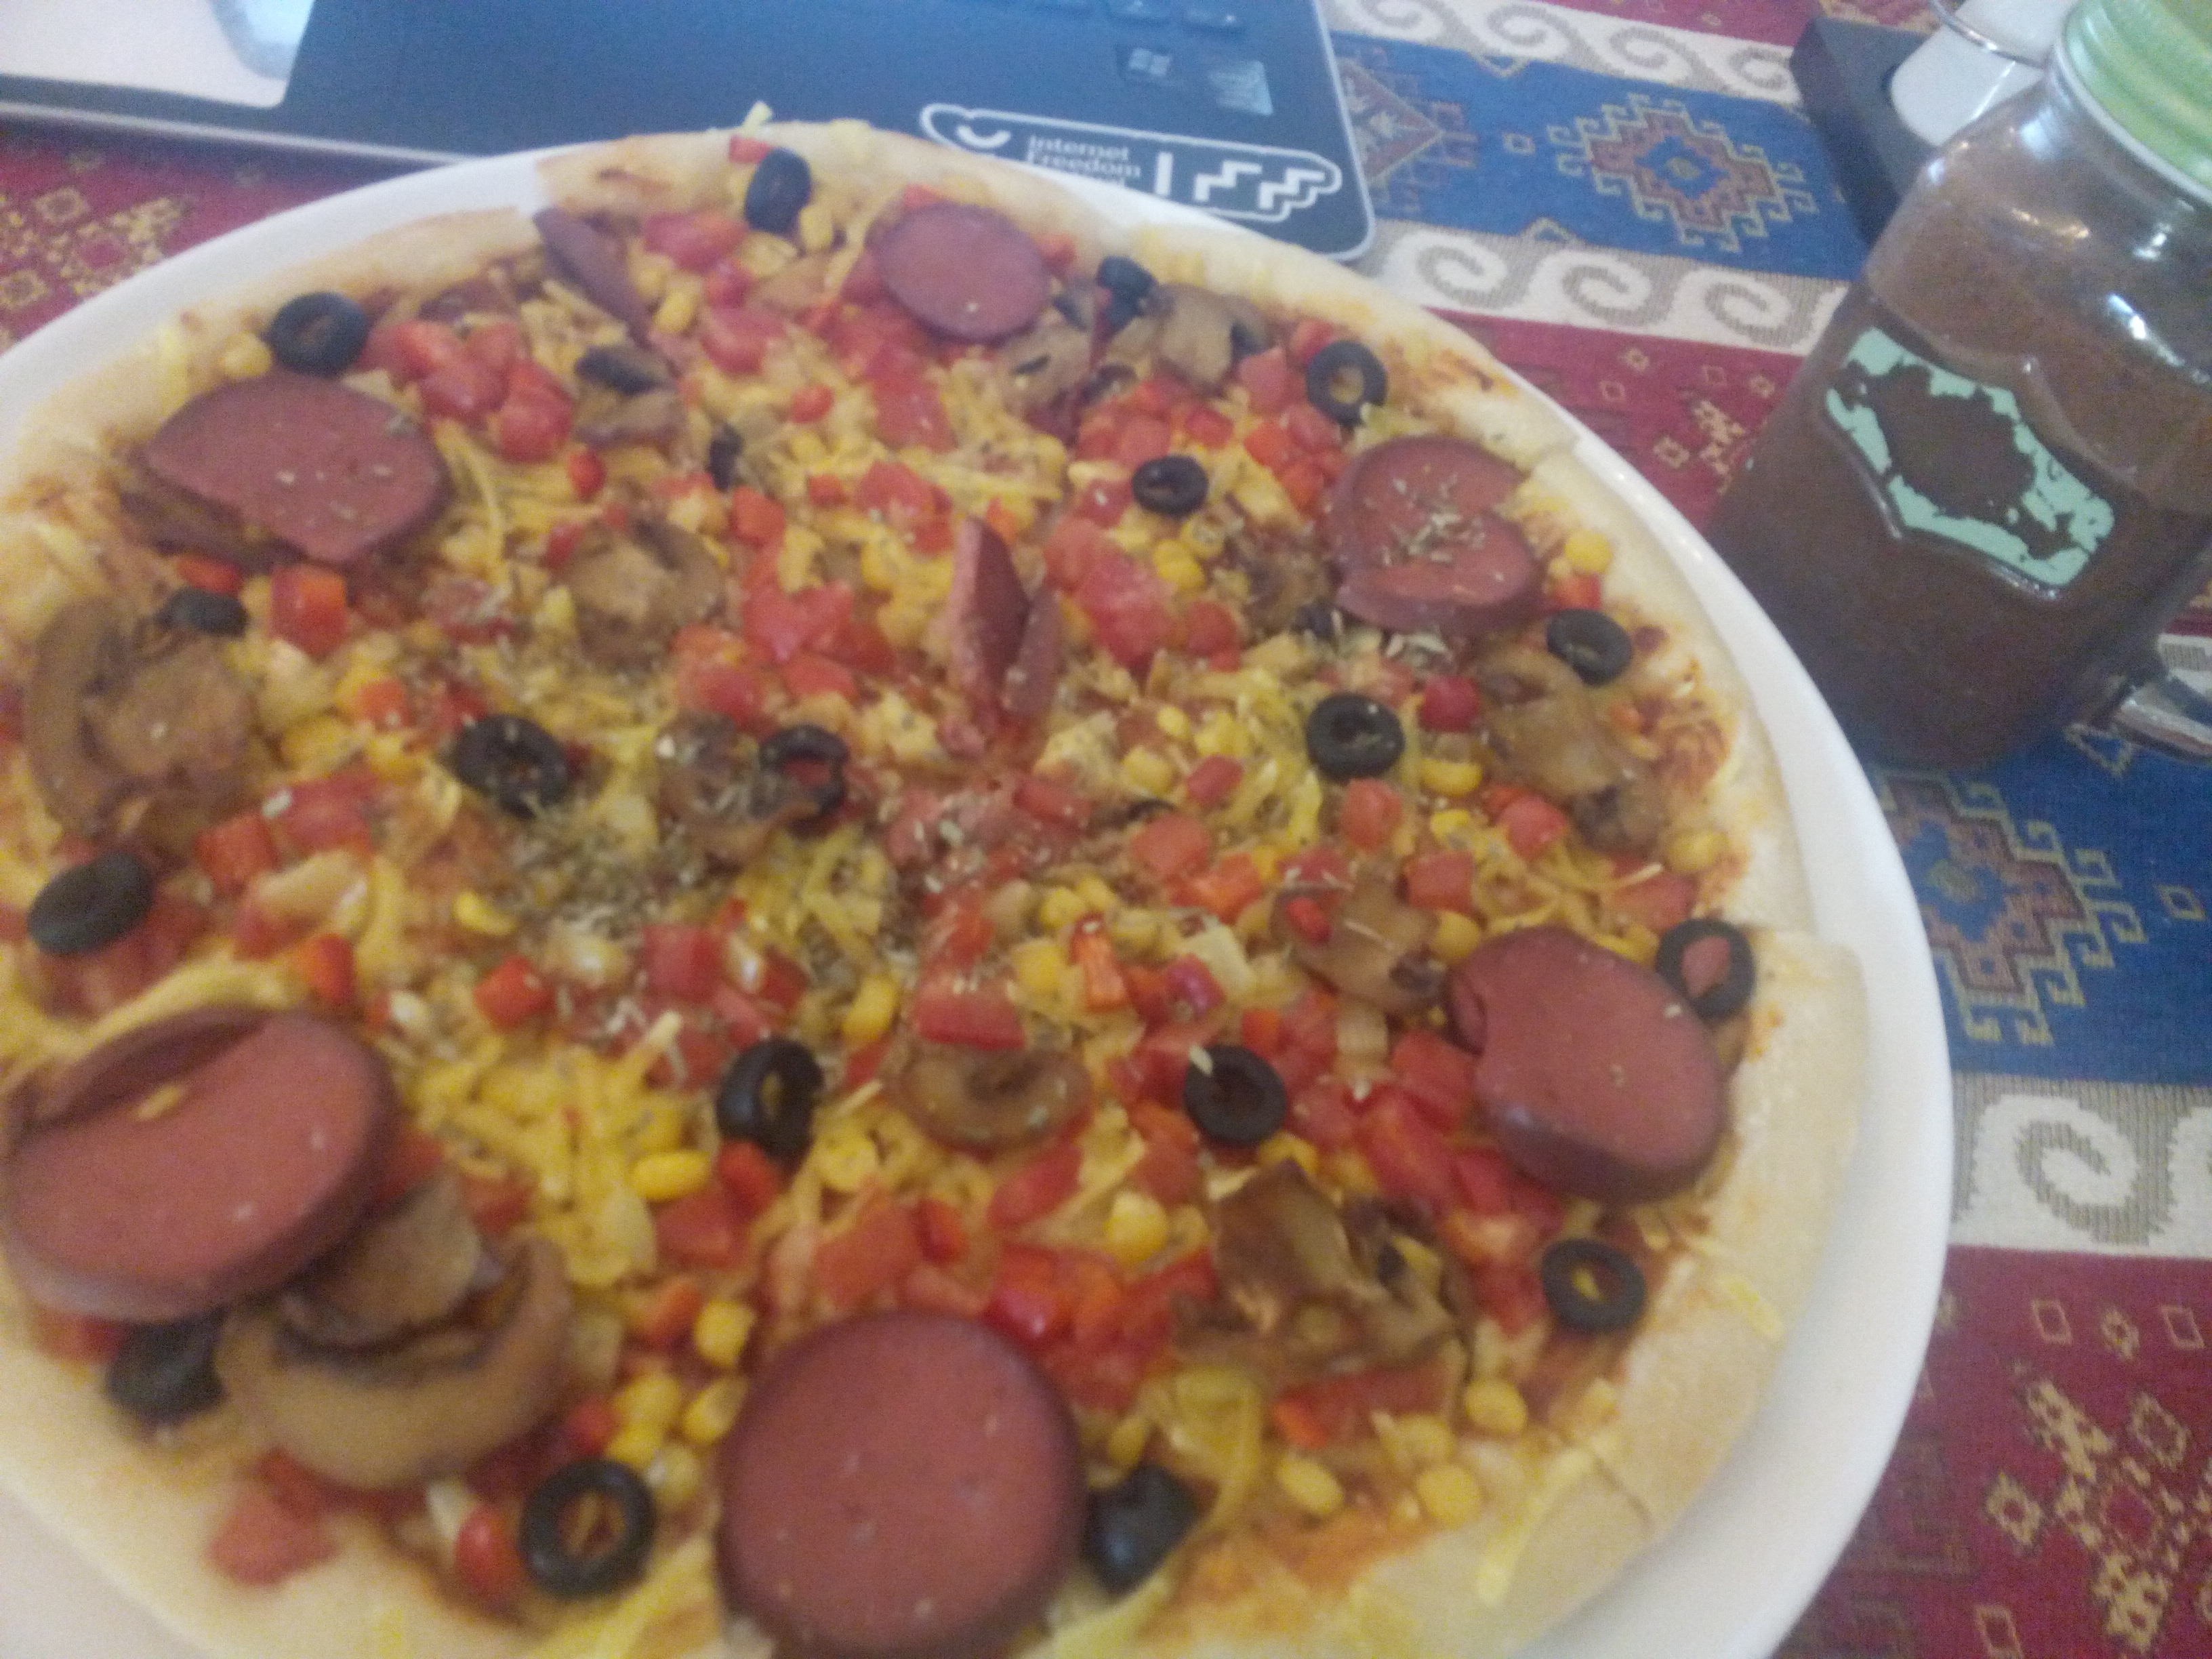 A colourful pizza on a plate with various veggies and not-sausage, on a table with a chocolate-coloured glass